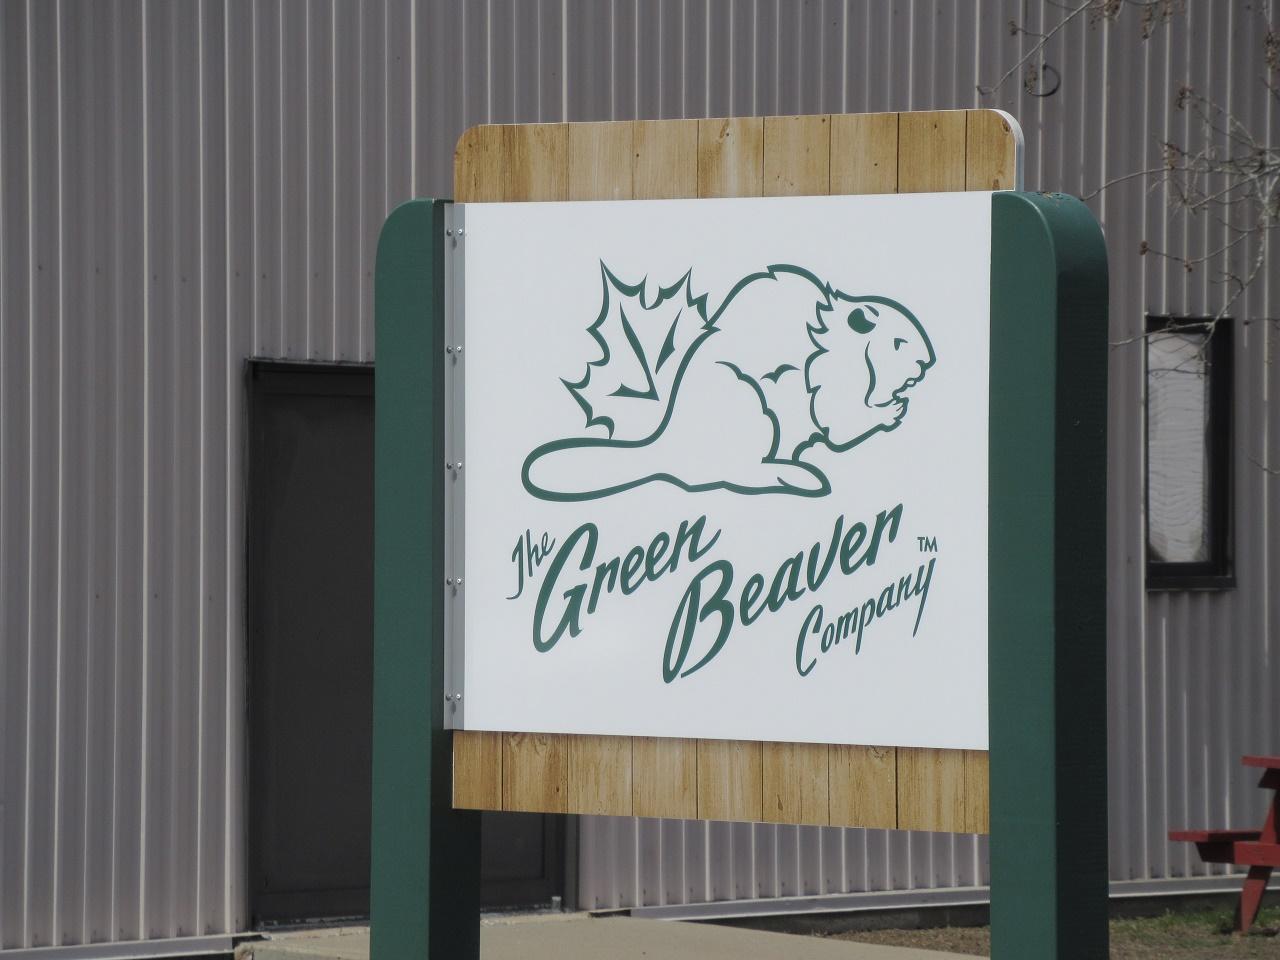 Green Beaver adds hand sanitizer to product line